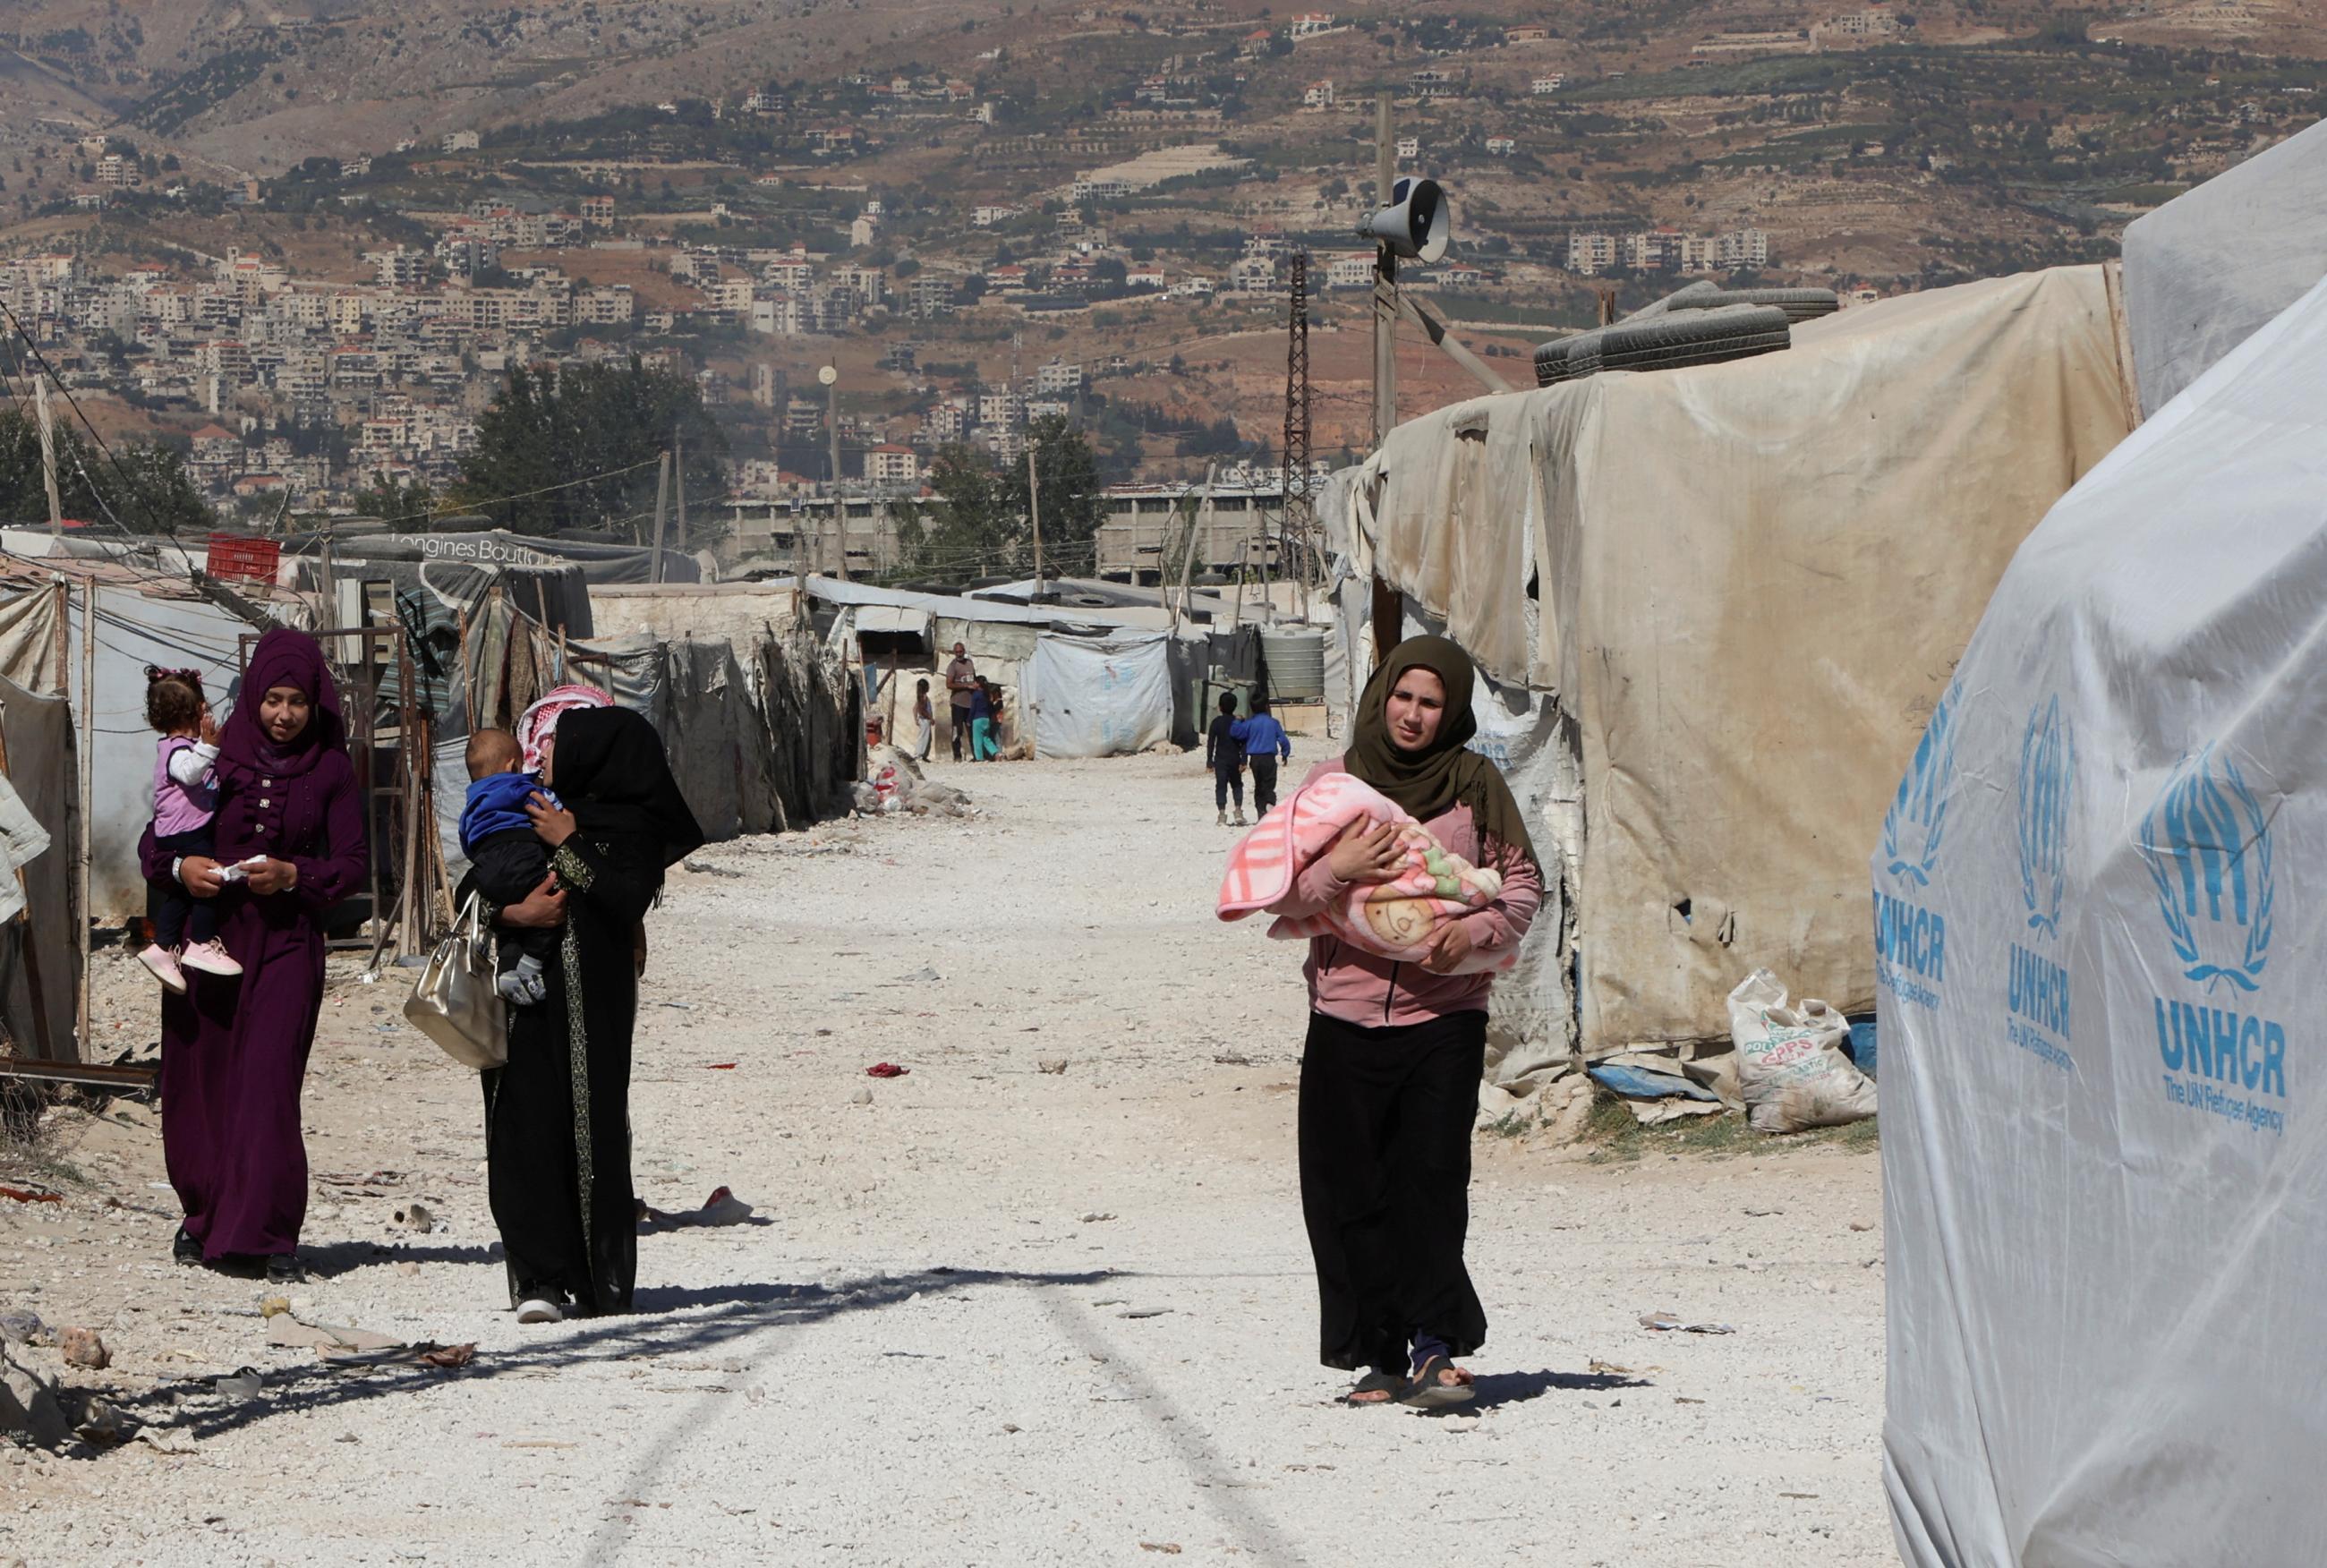 Syrian refugee women carry children as they walk at an informal camp, in the Bekaa Valley, Lebanon October 18, 2022.